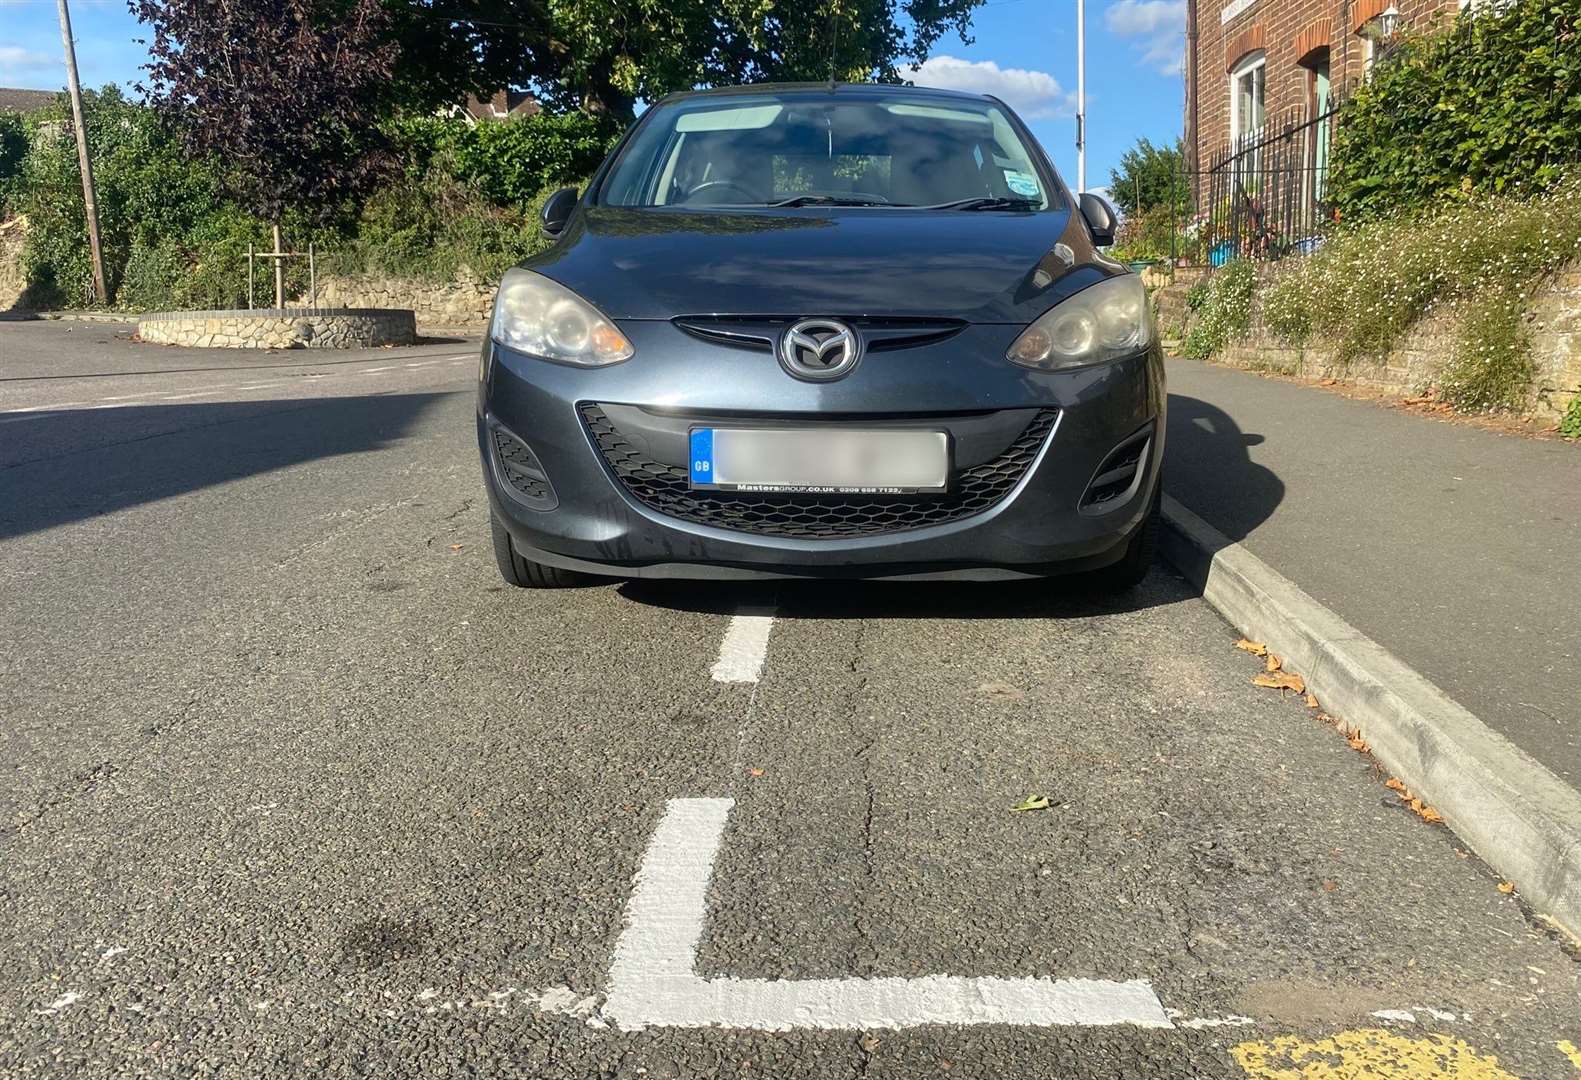 The newly painted lines are half the size of an average car